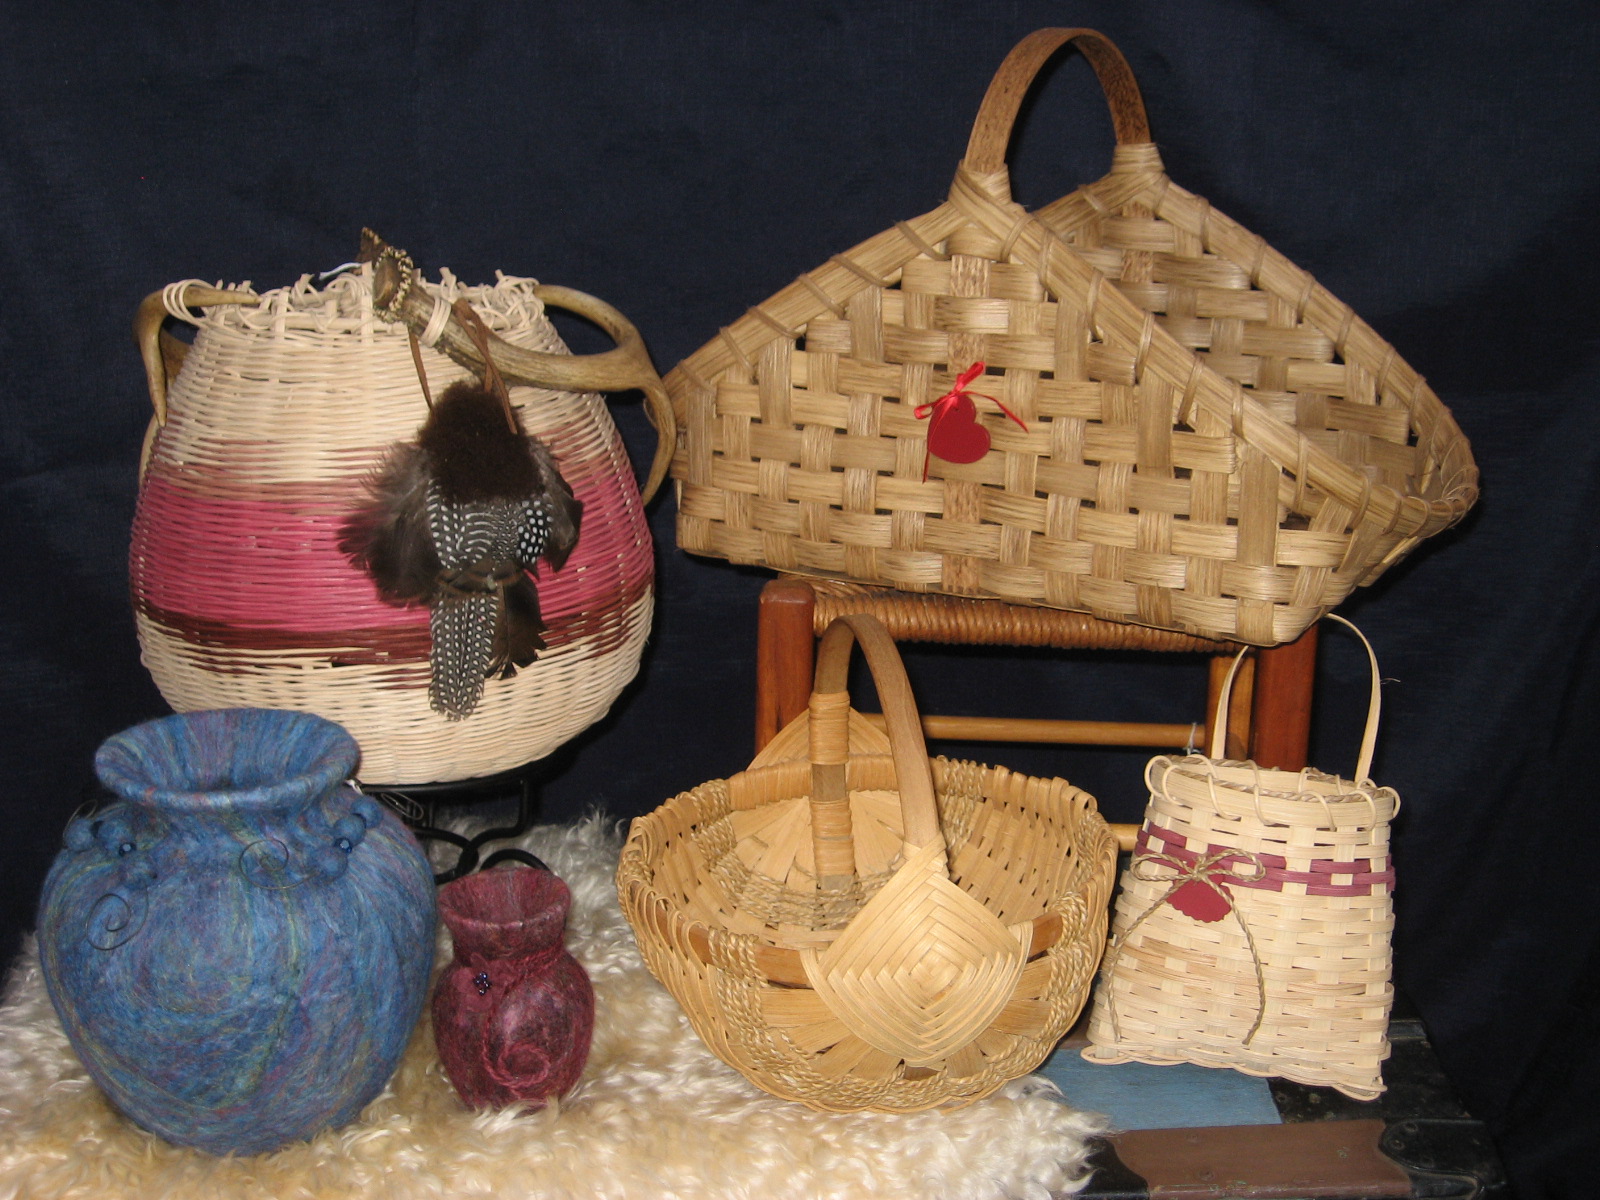 Sharon Reiland felting and basketry